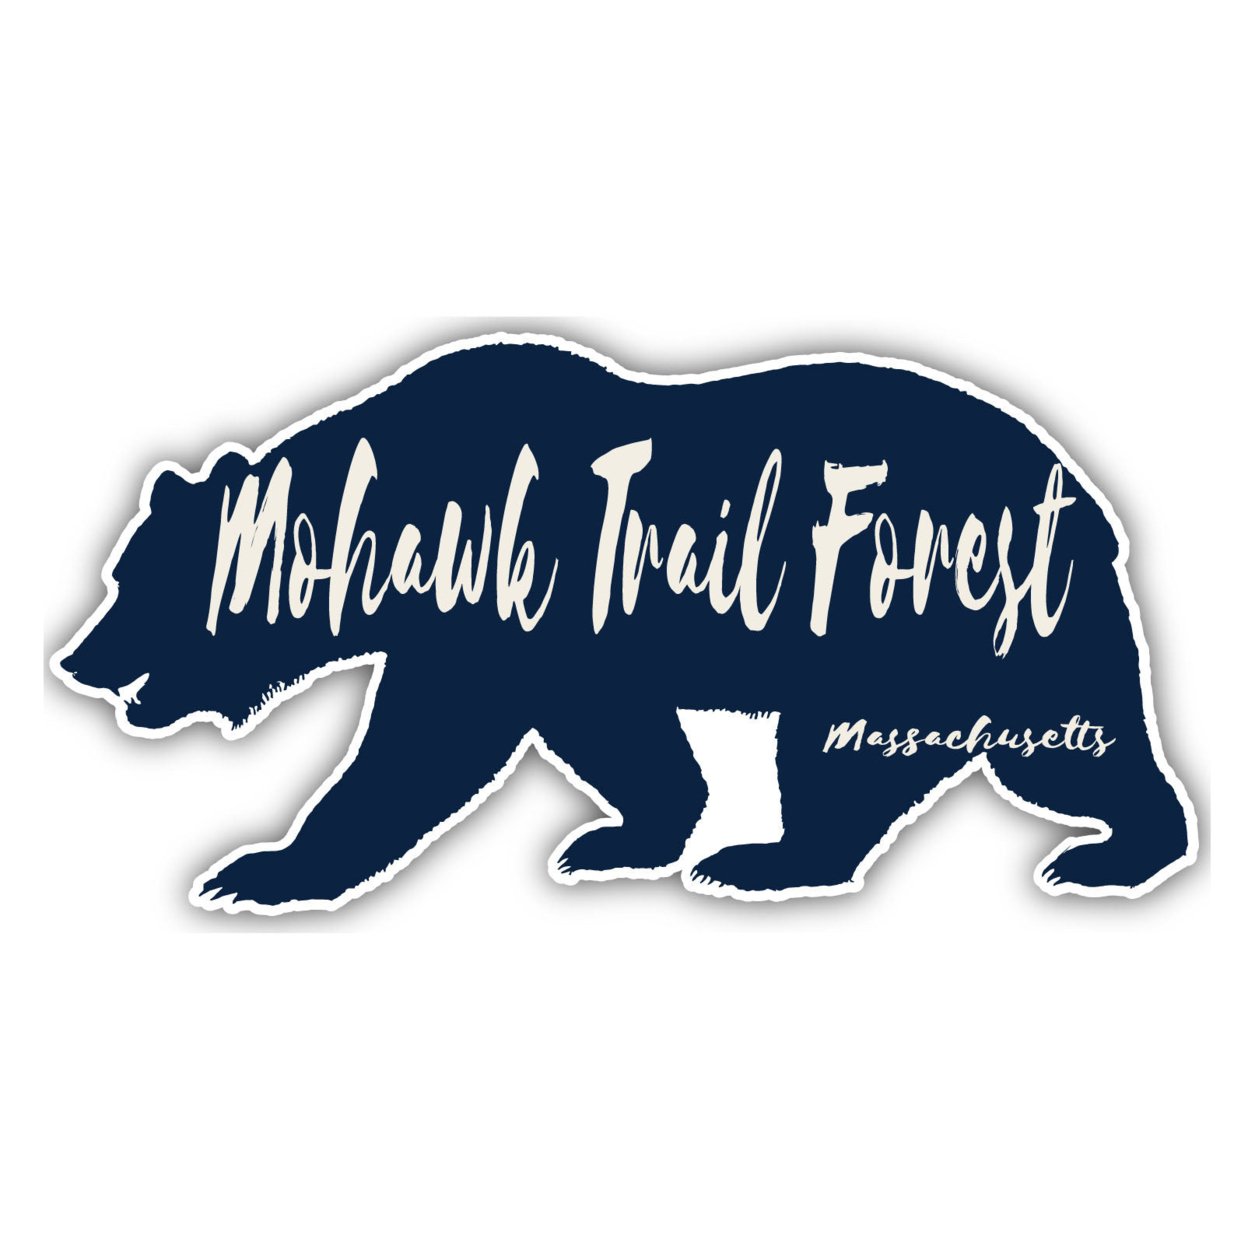 Mohawk Trail Forest Massachusetts Souvenir Decorative Stickers (Choose Theme And Size) - 4-Inch, Bear